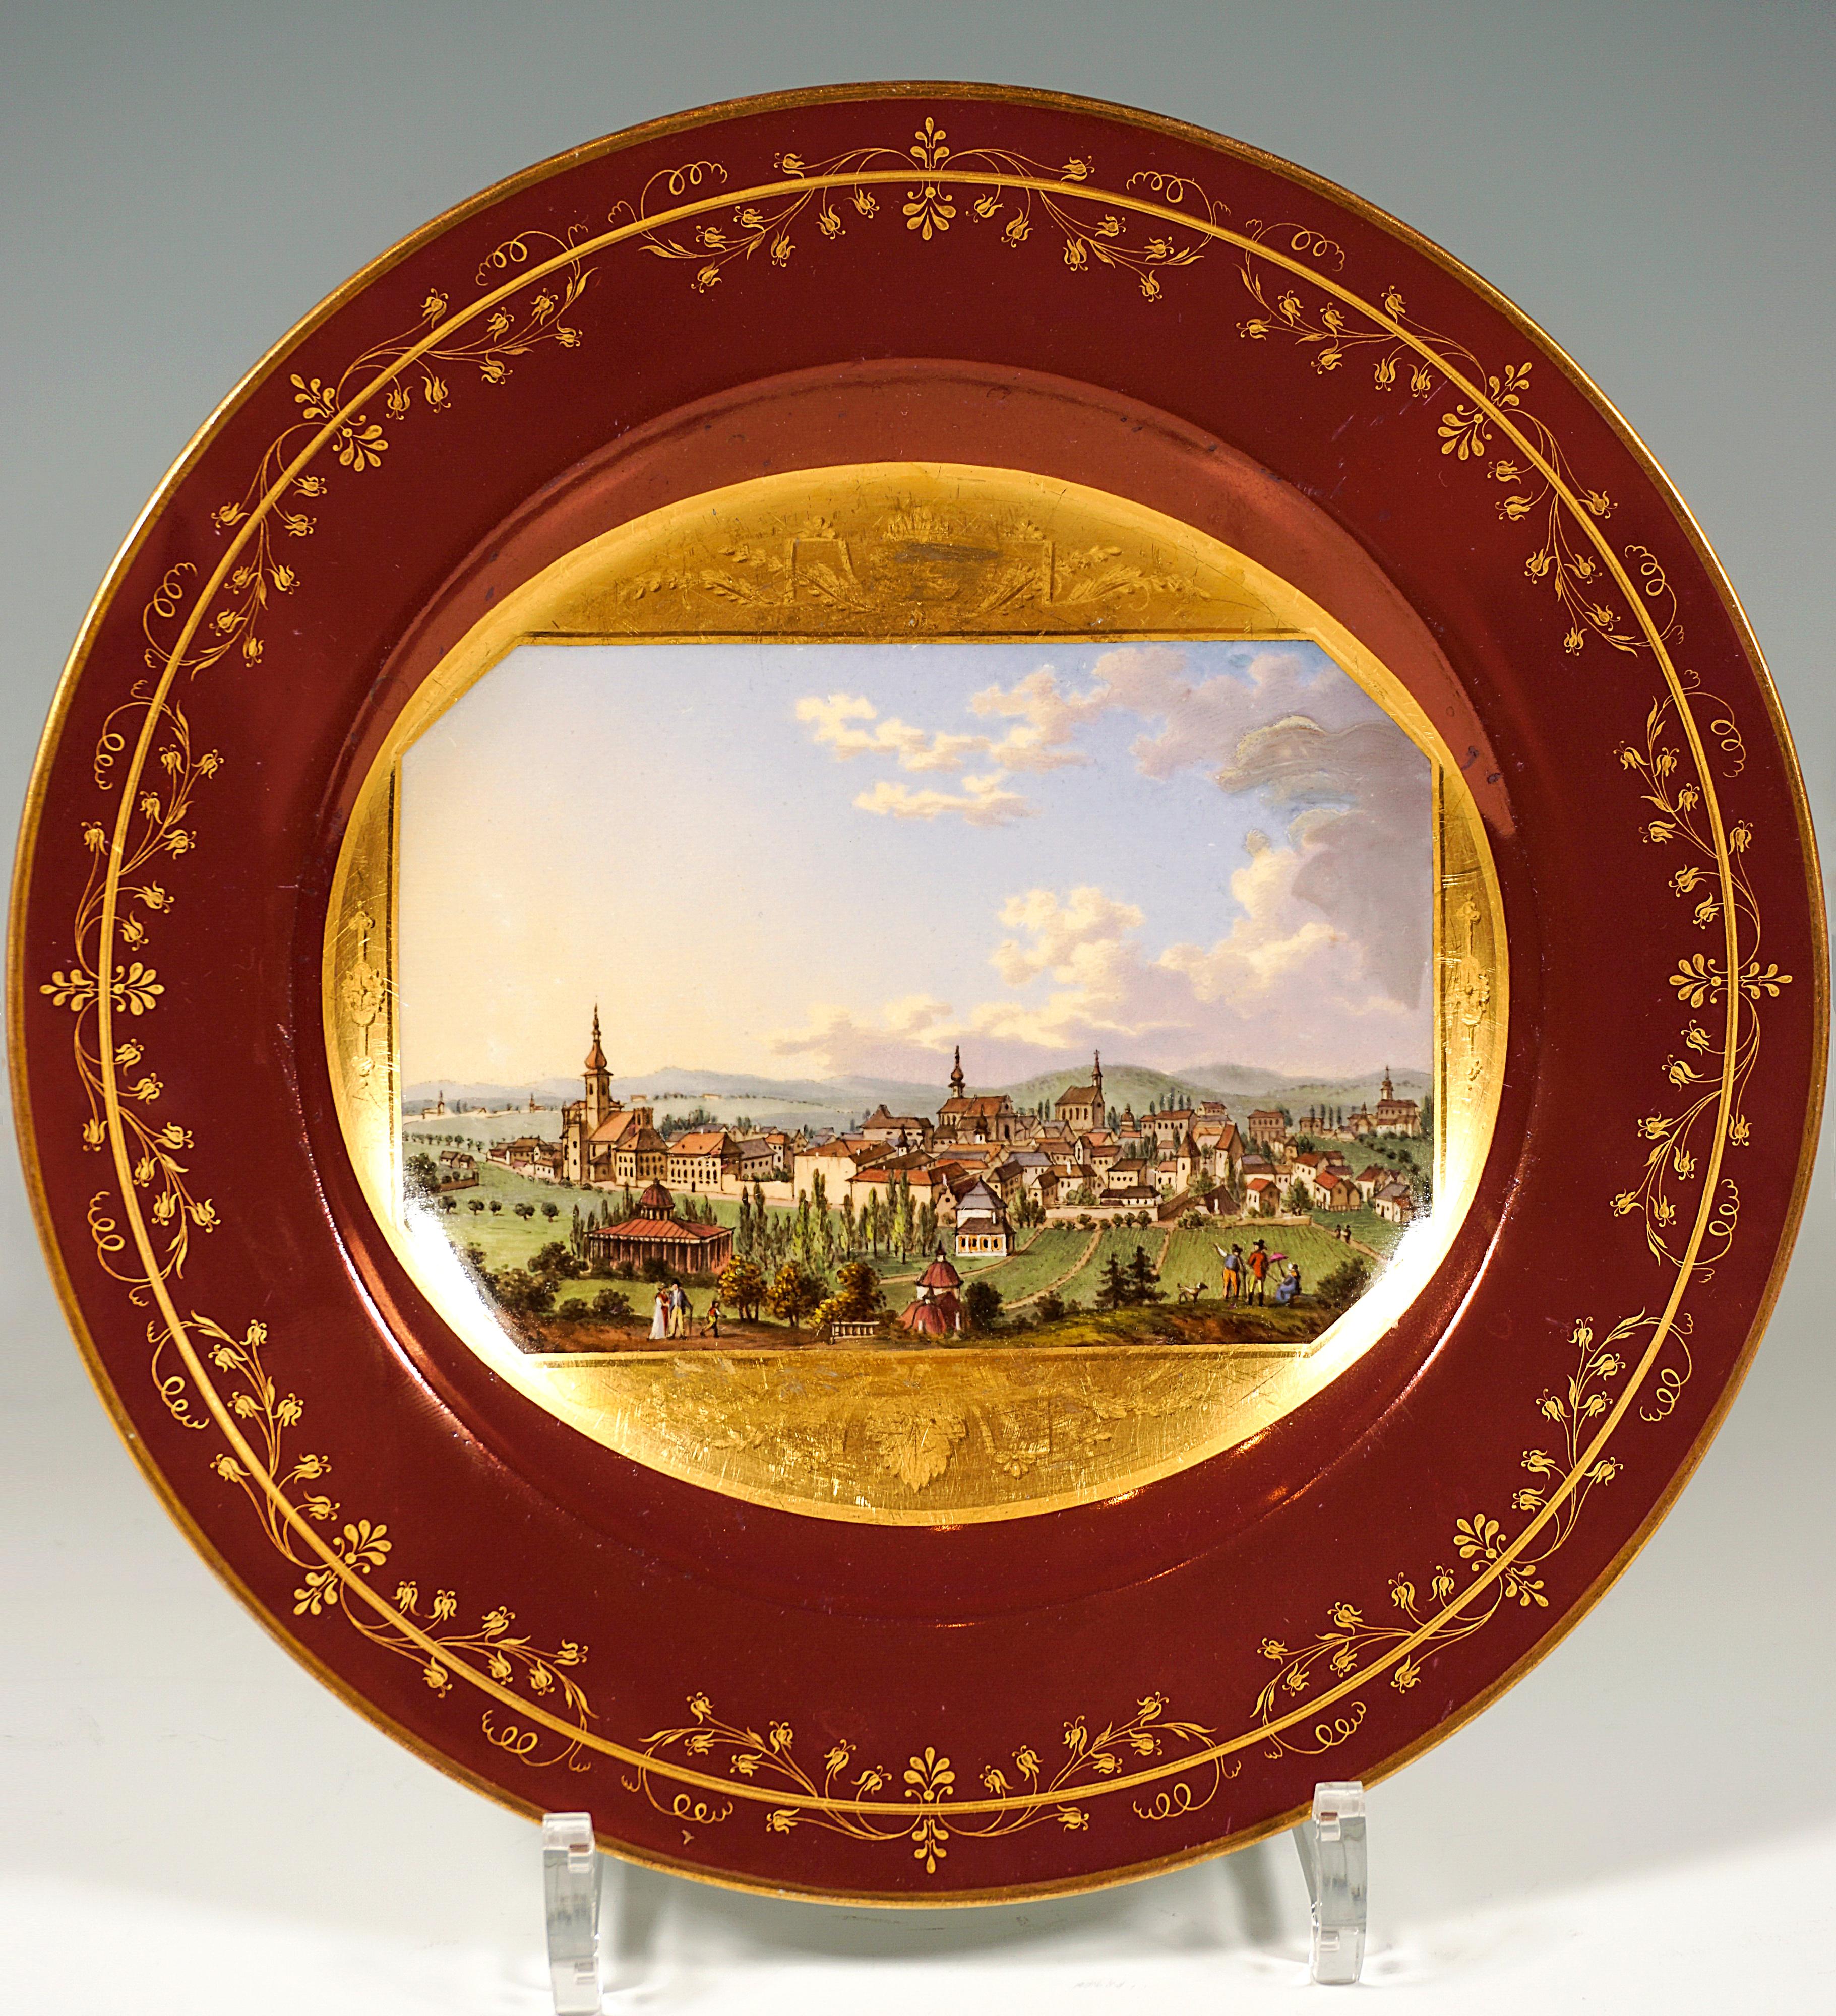 Porcelain plate decorated with fine veduta painting: in the mirror octagonal picture panel against golden background, framed with matte gold painted festoons above and below the picture, depicting the view of Baden bei Wien from the Kalvarienberg